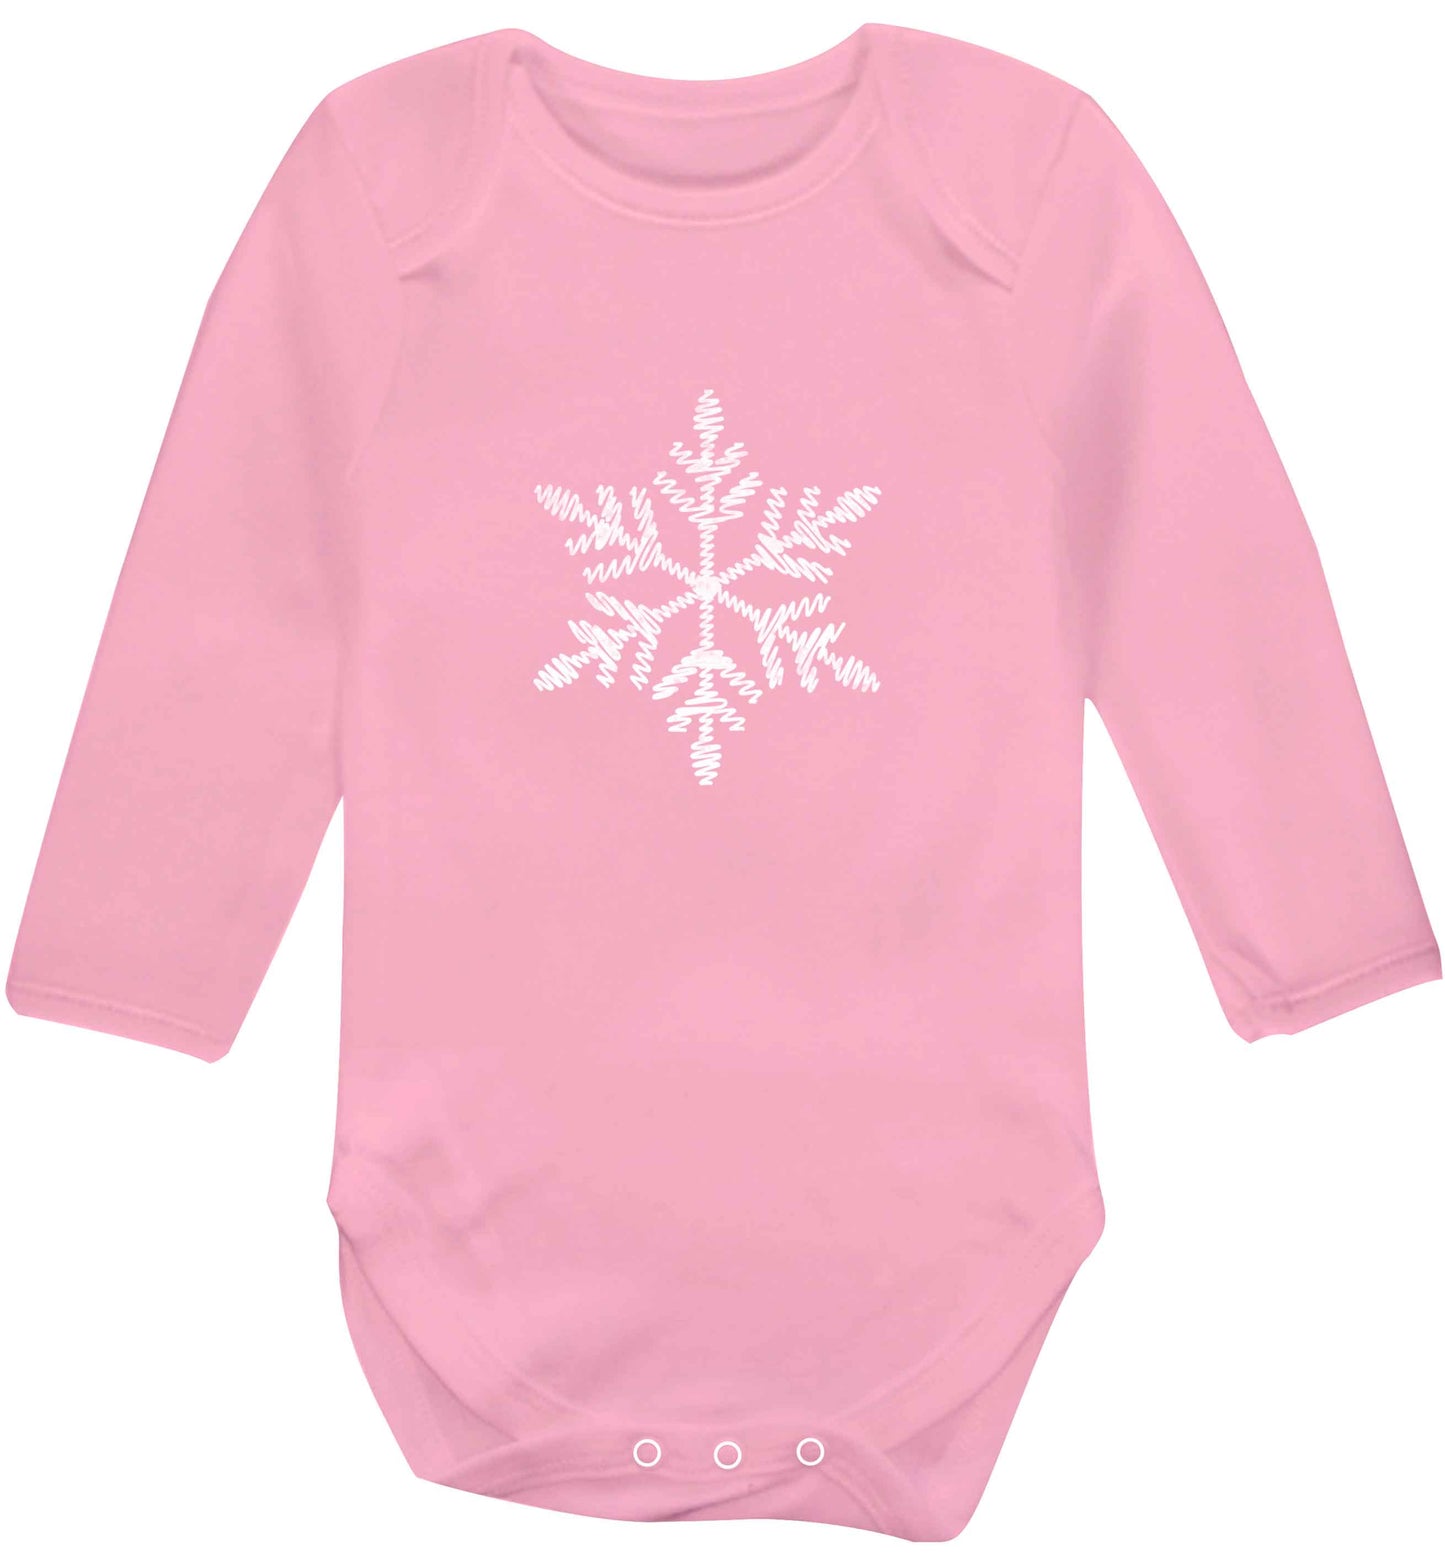 Snowflake baby vest long sleeved pale pink 6-12 months